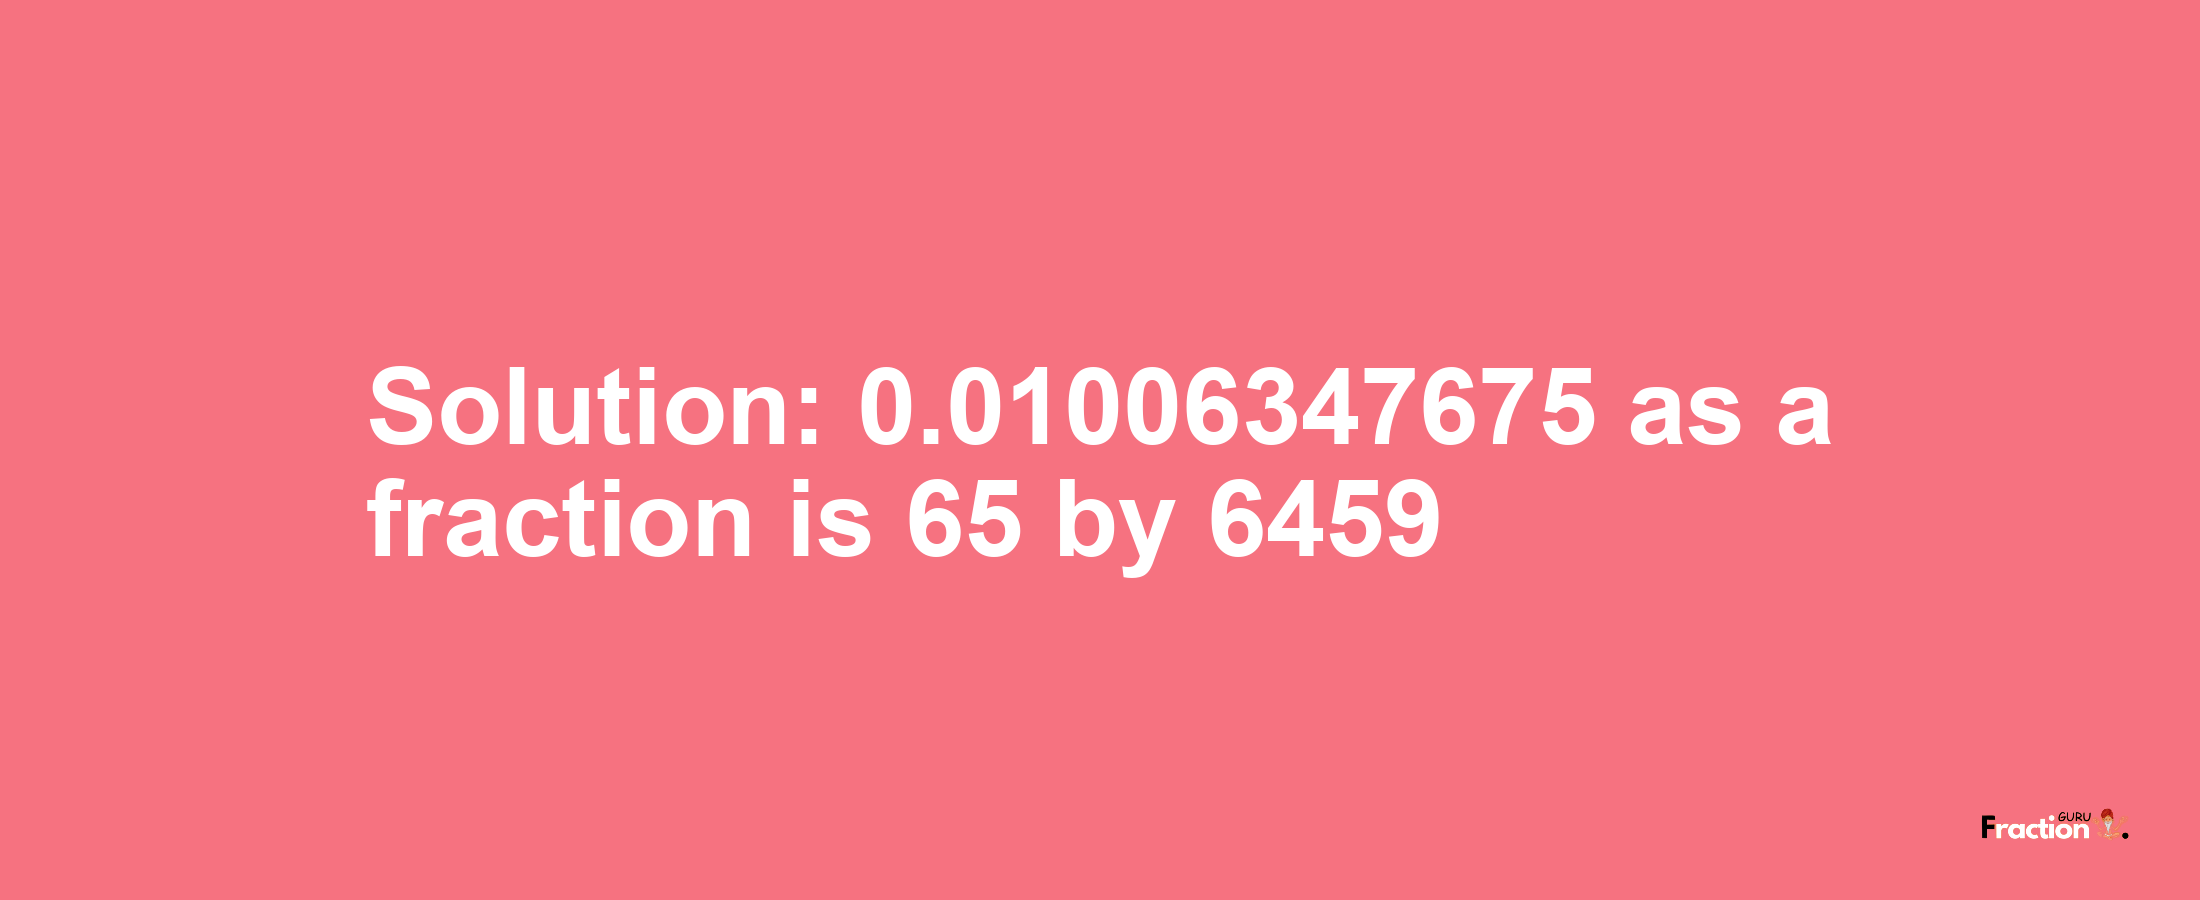 Solution:0.01006347675 as a fraction is 65/6459